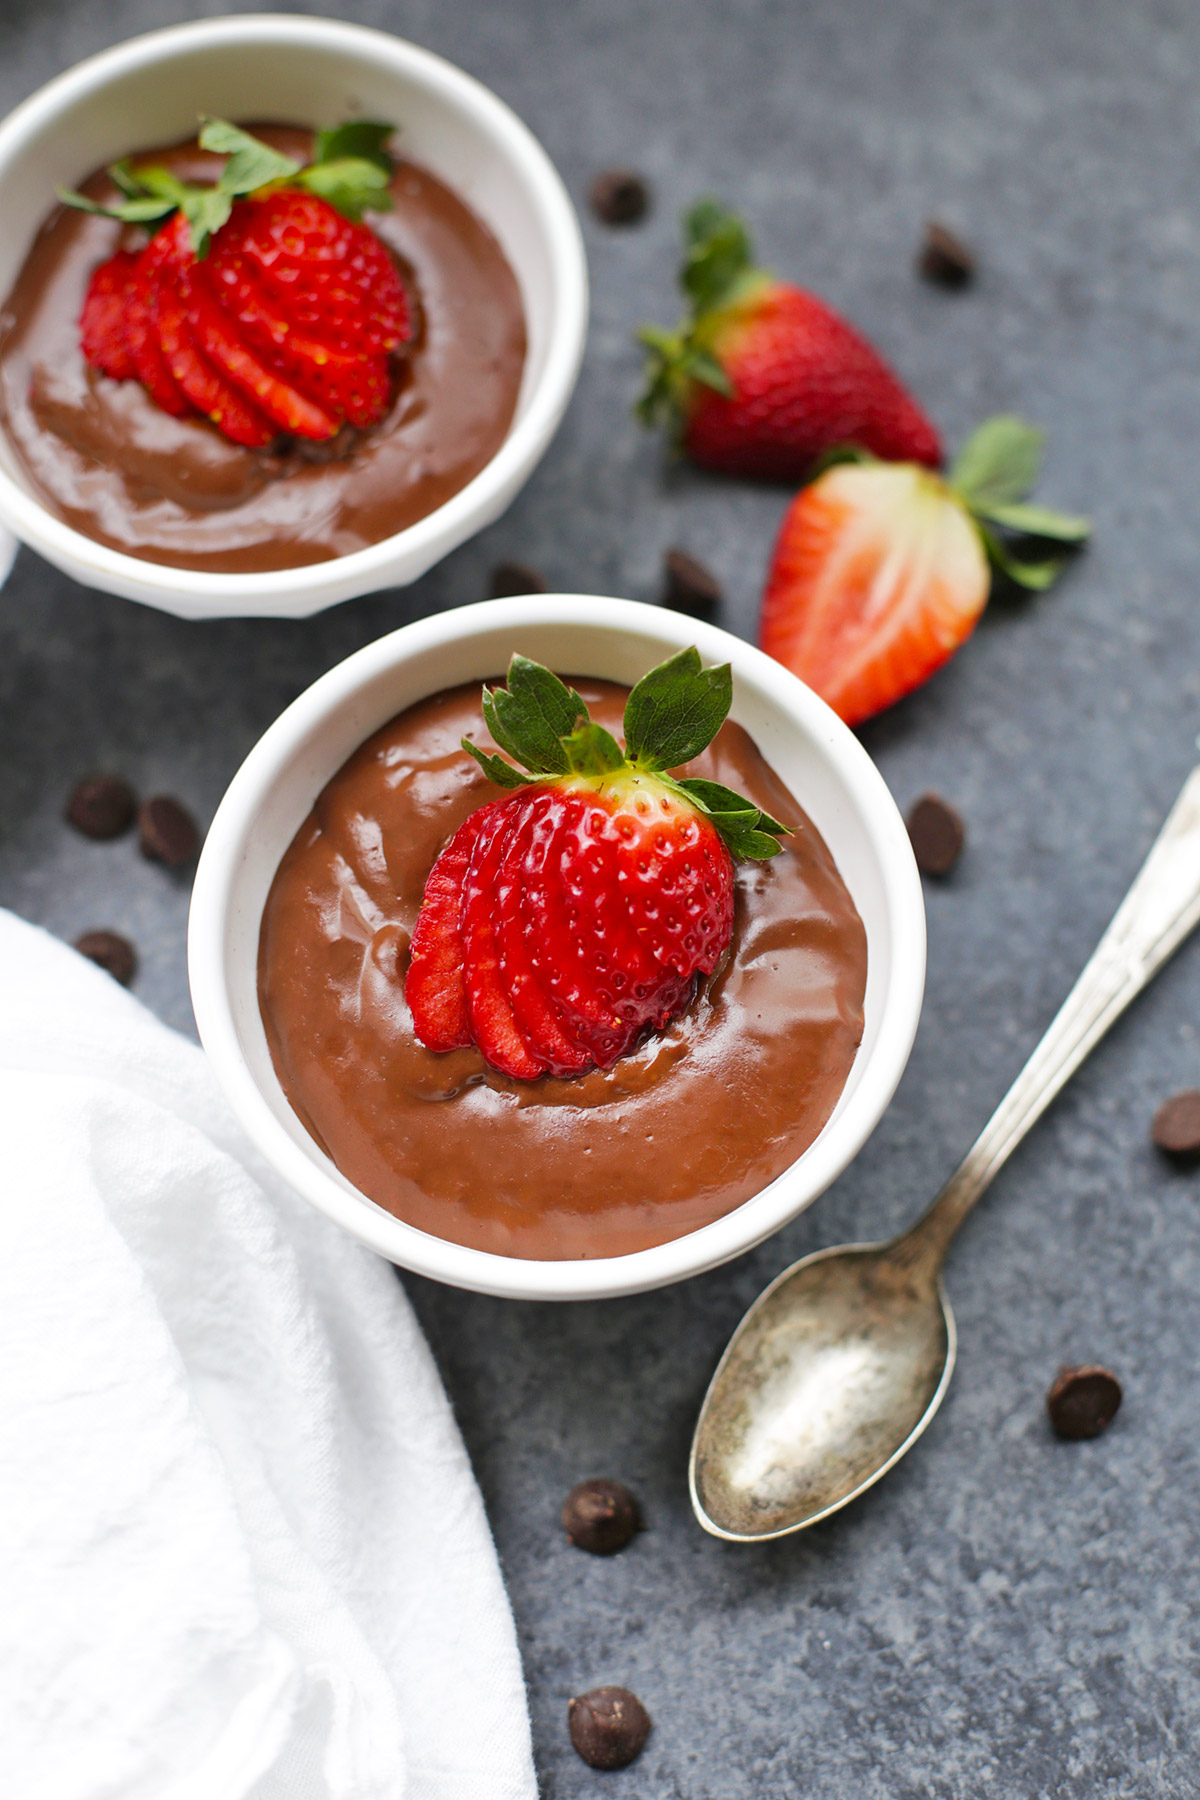 Paleo + Vegan Chocolate Pudding from One Lovely Life